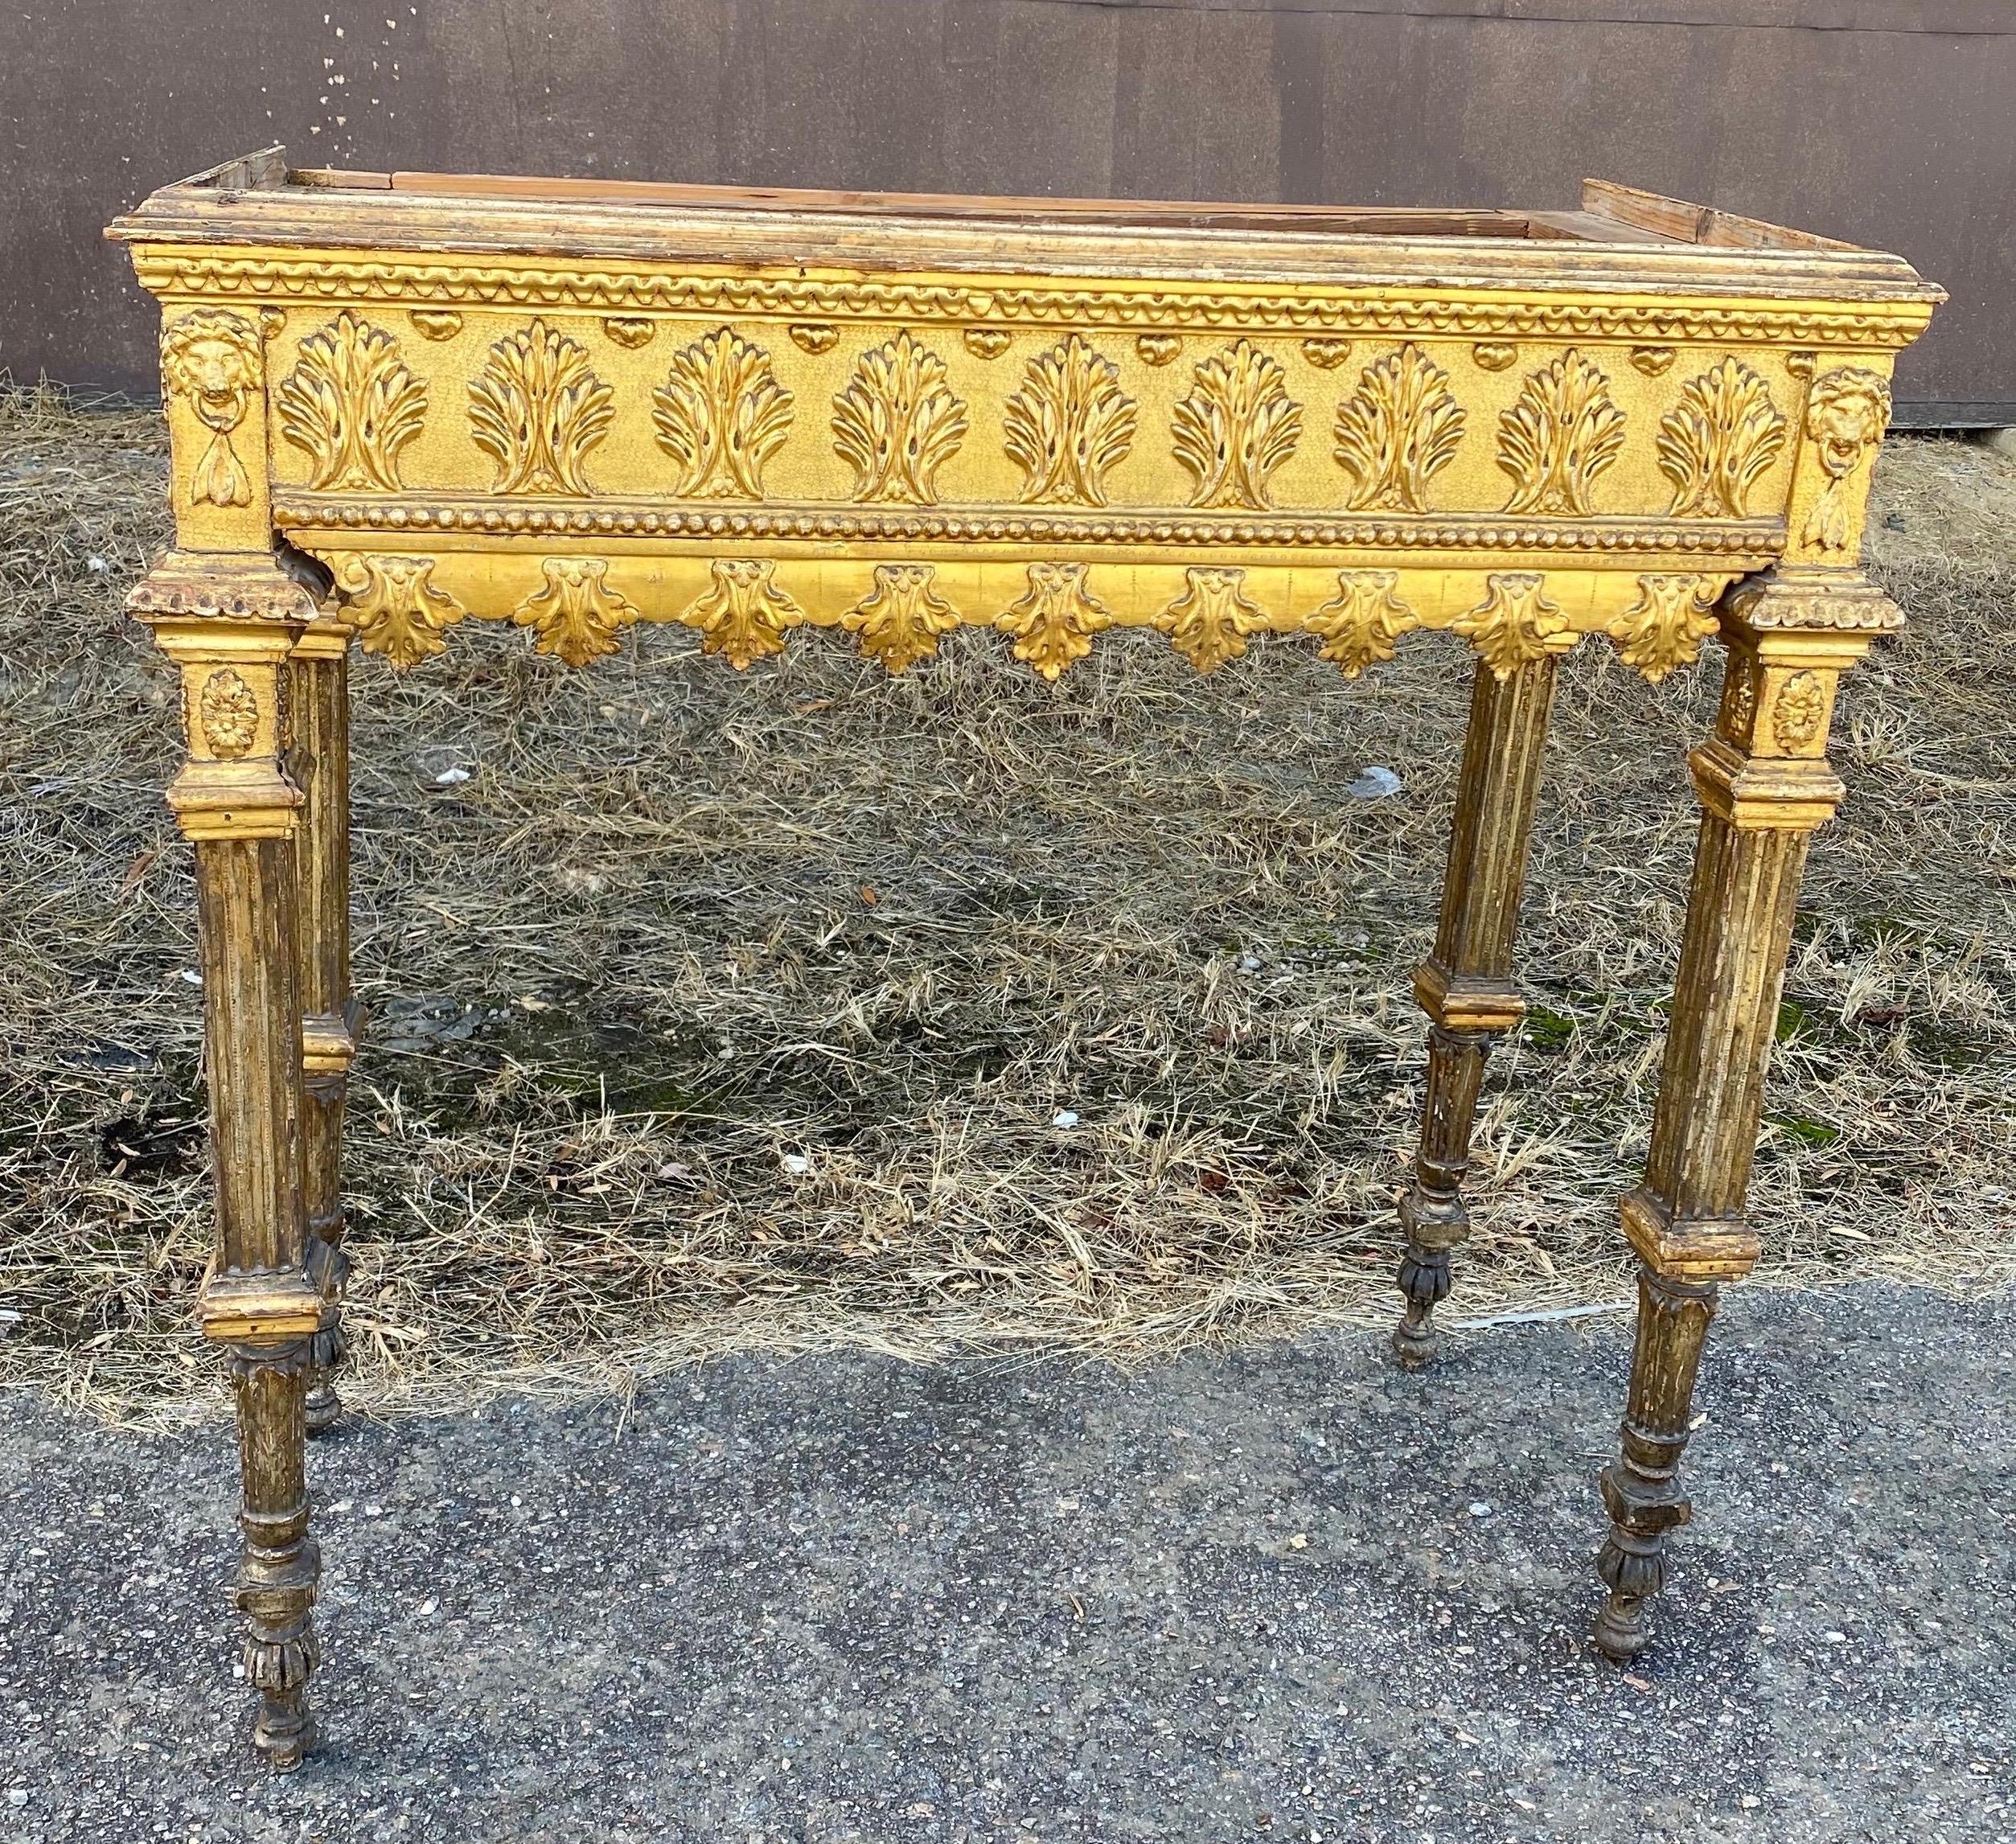 Incredible 18th Century Italian Neoclassical Giltwood Marble Top Console For Sale 6